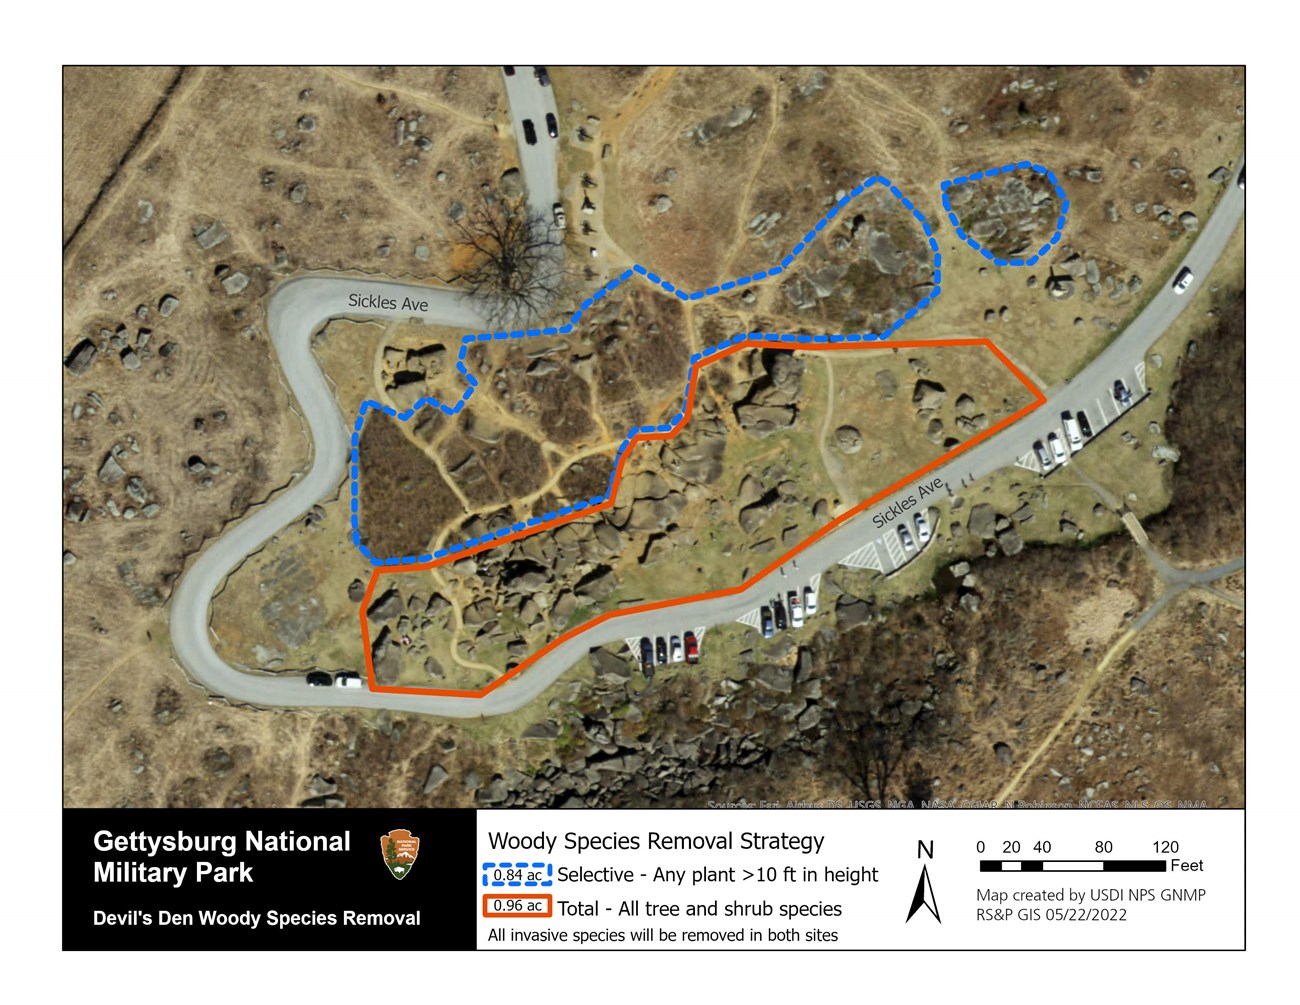 An overhead map of the Devil's Den area of the Gettysburg Battlefield. There is a red outline around a field of large boulders and two blue dashed outlines abound other large boulders and pathways.